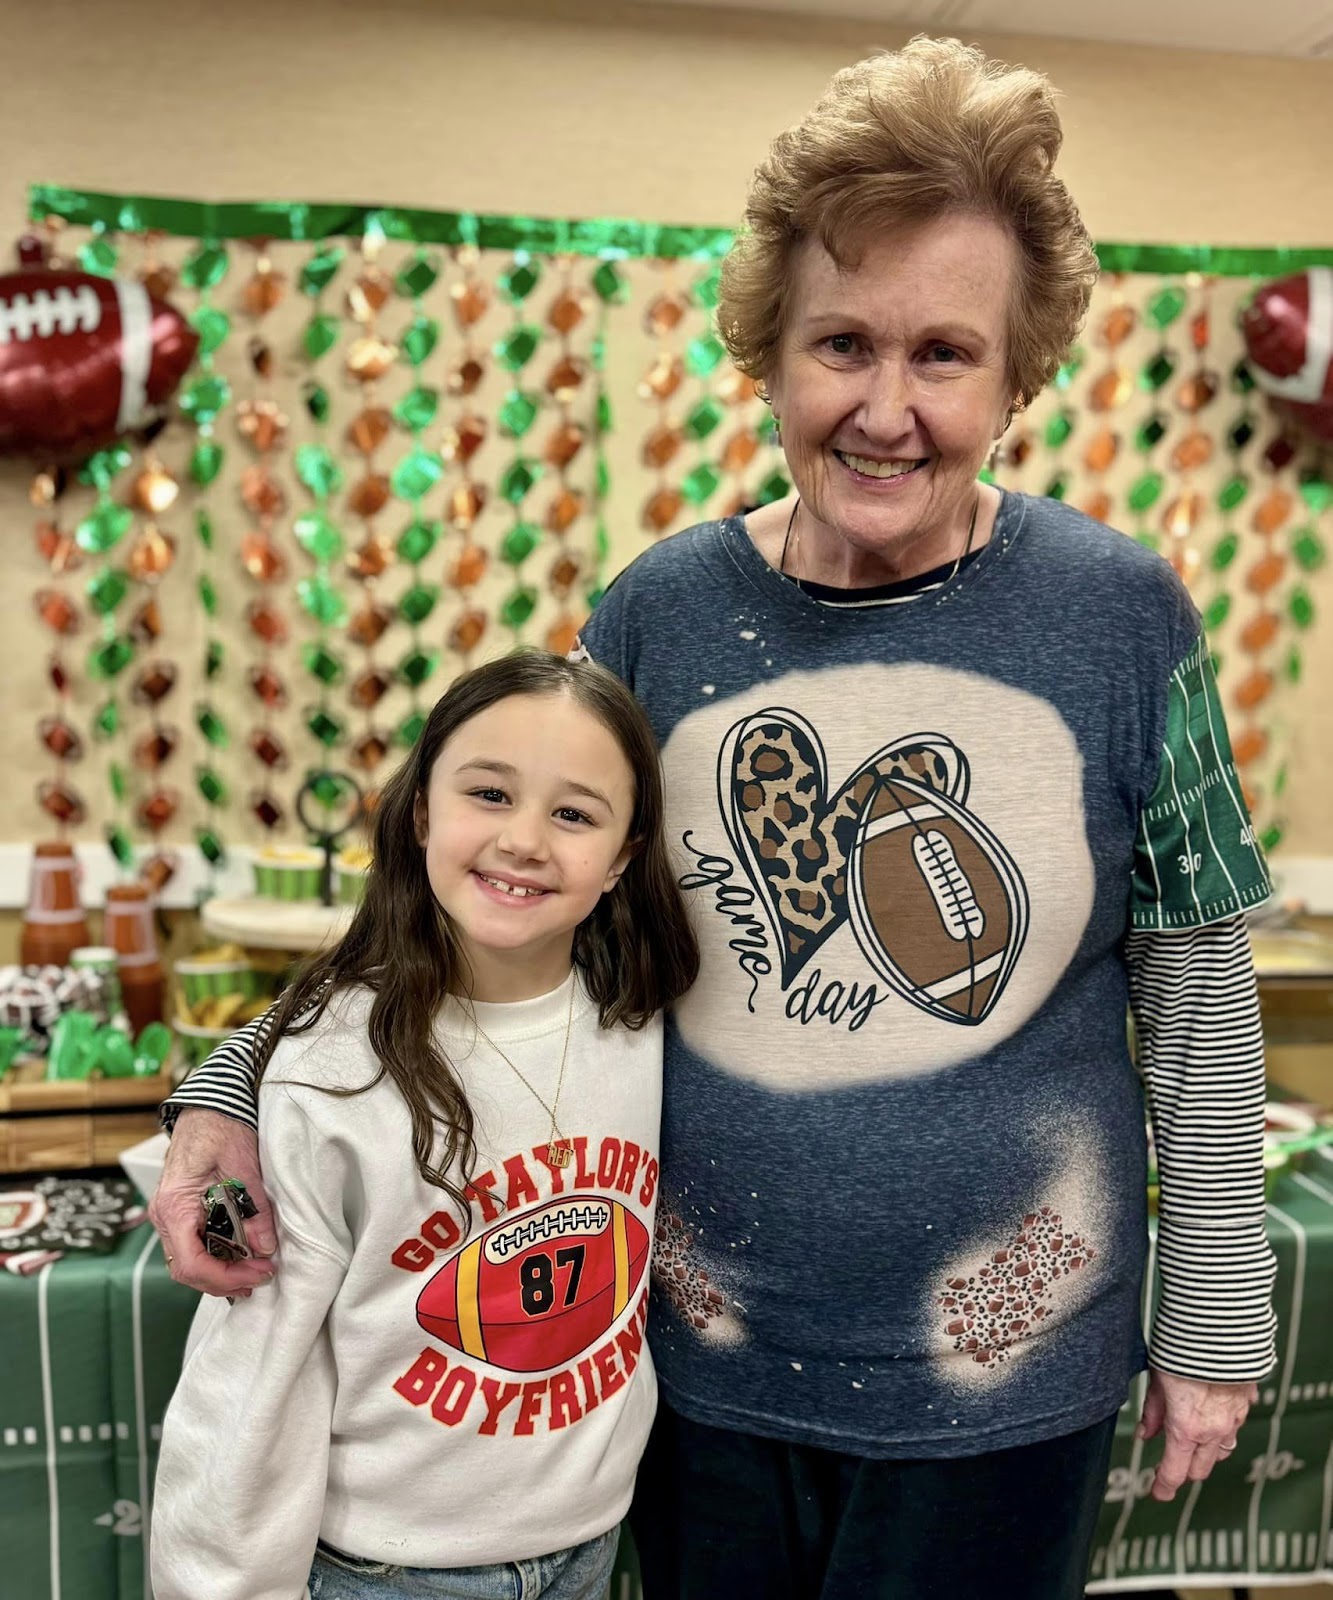 A memory care resident an elementary school-aged child smiling with football sweatshirts.